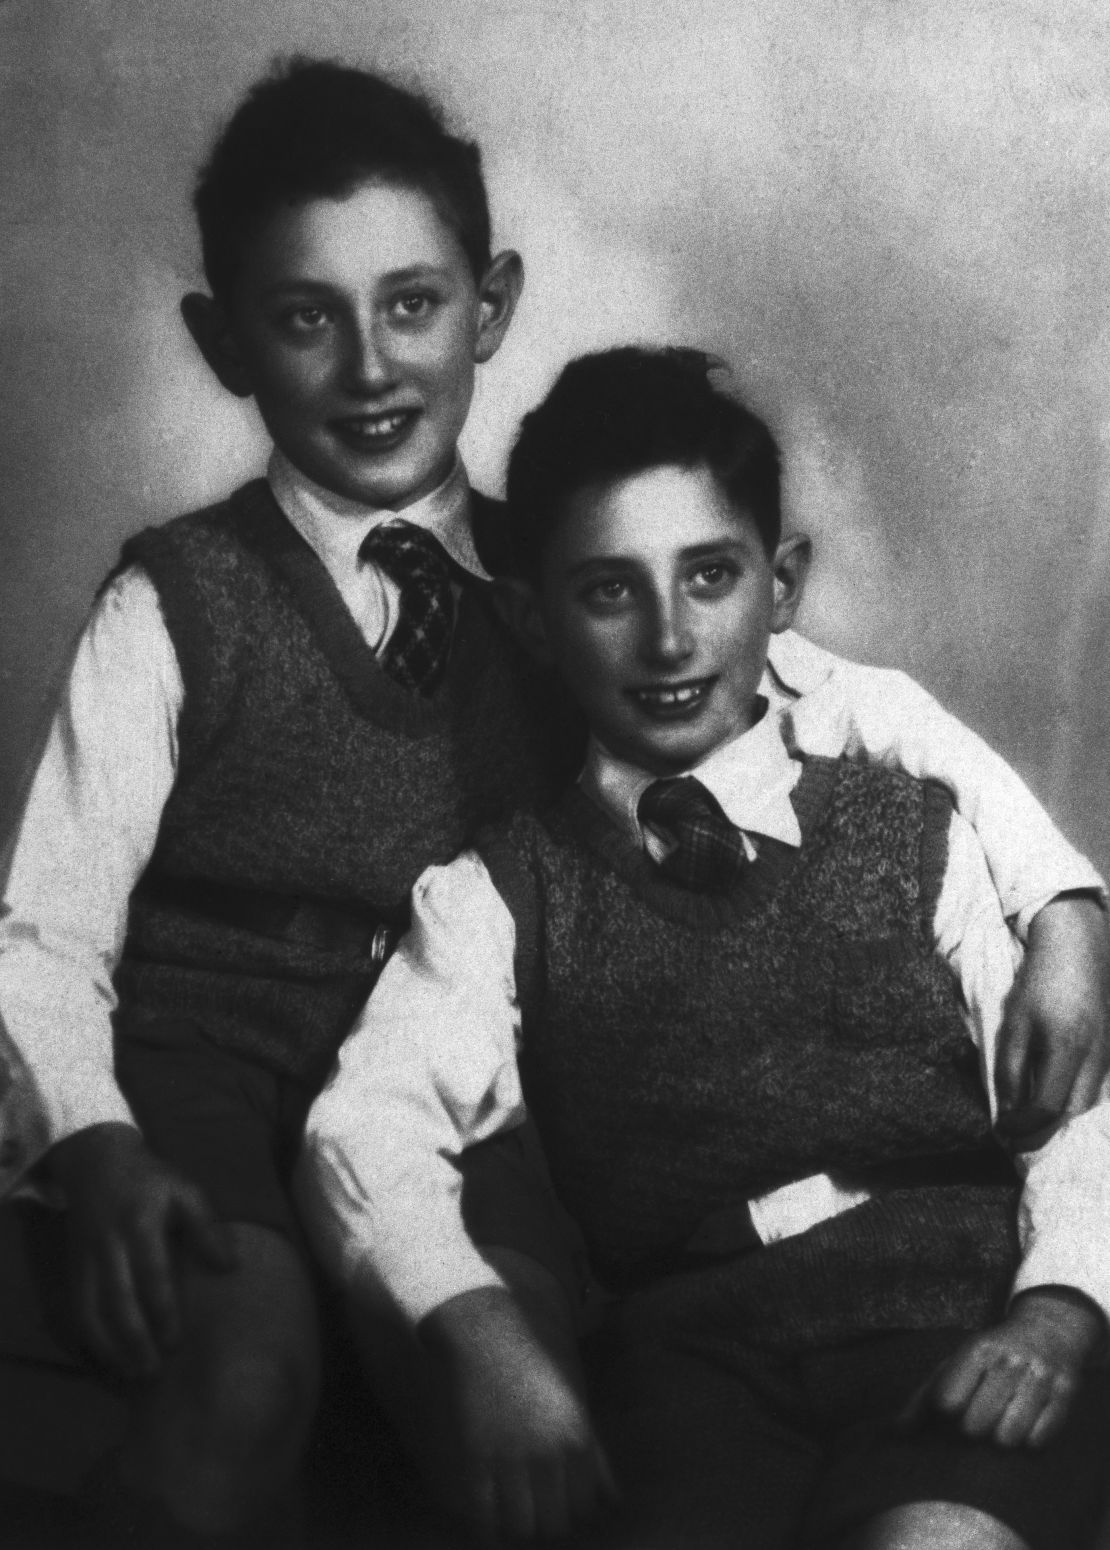 Henry Kissinger is shown at age 11 with his brother Walter, 10.